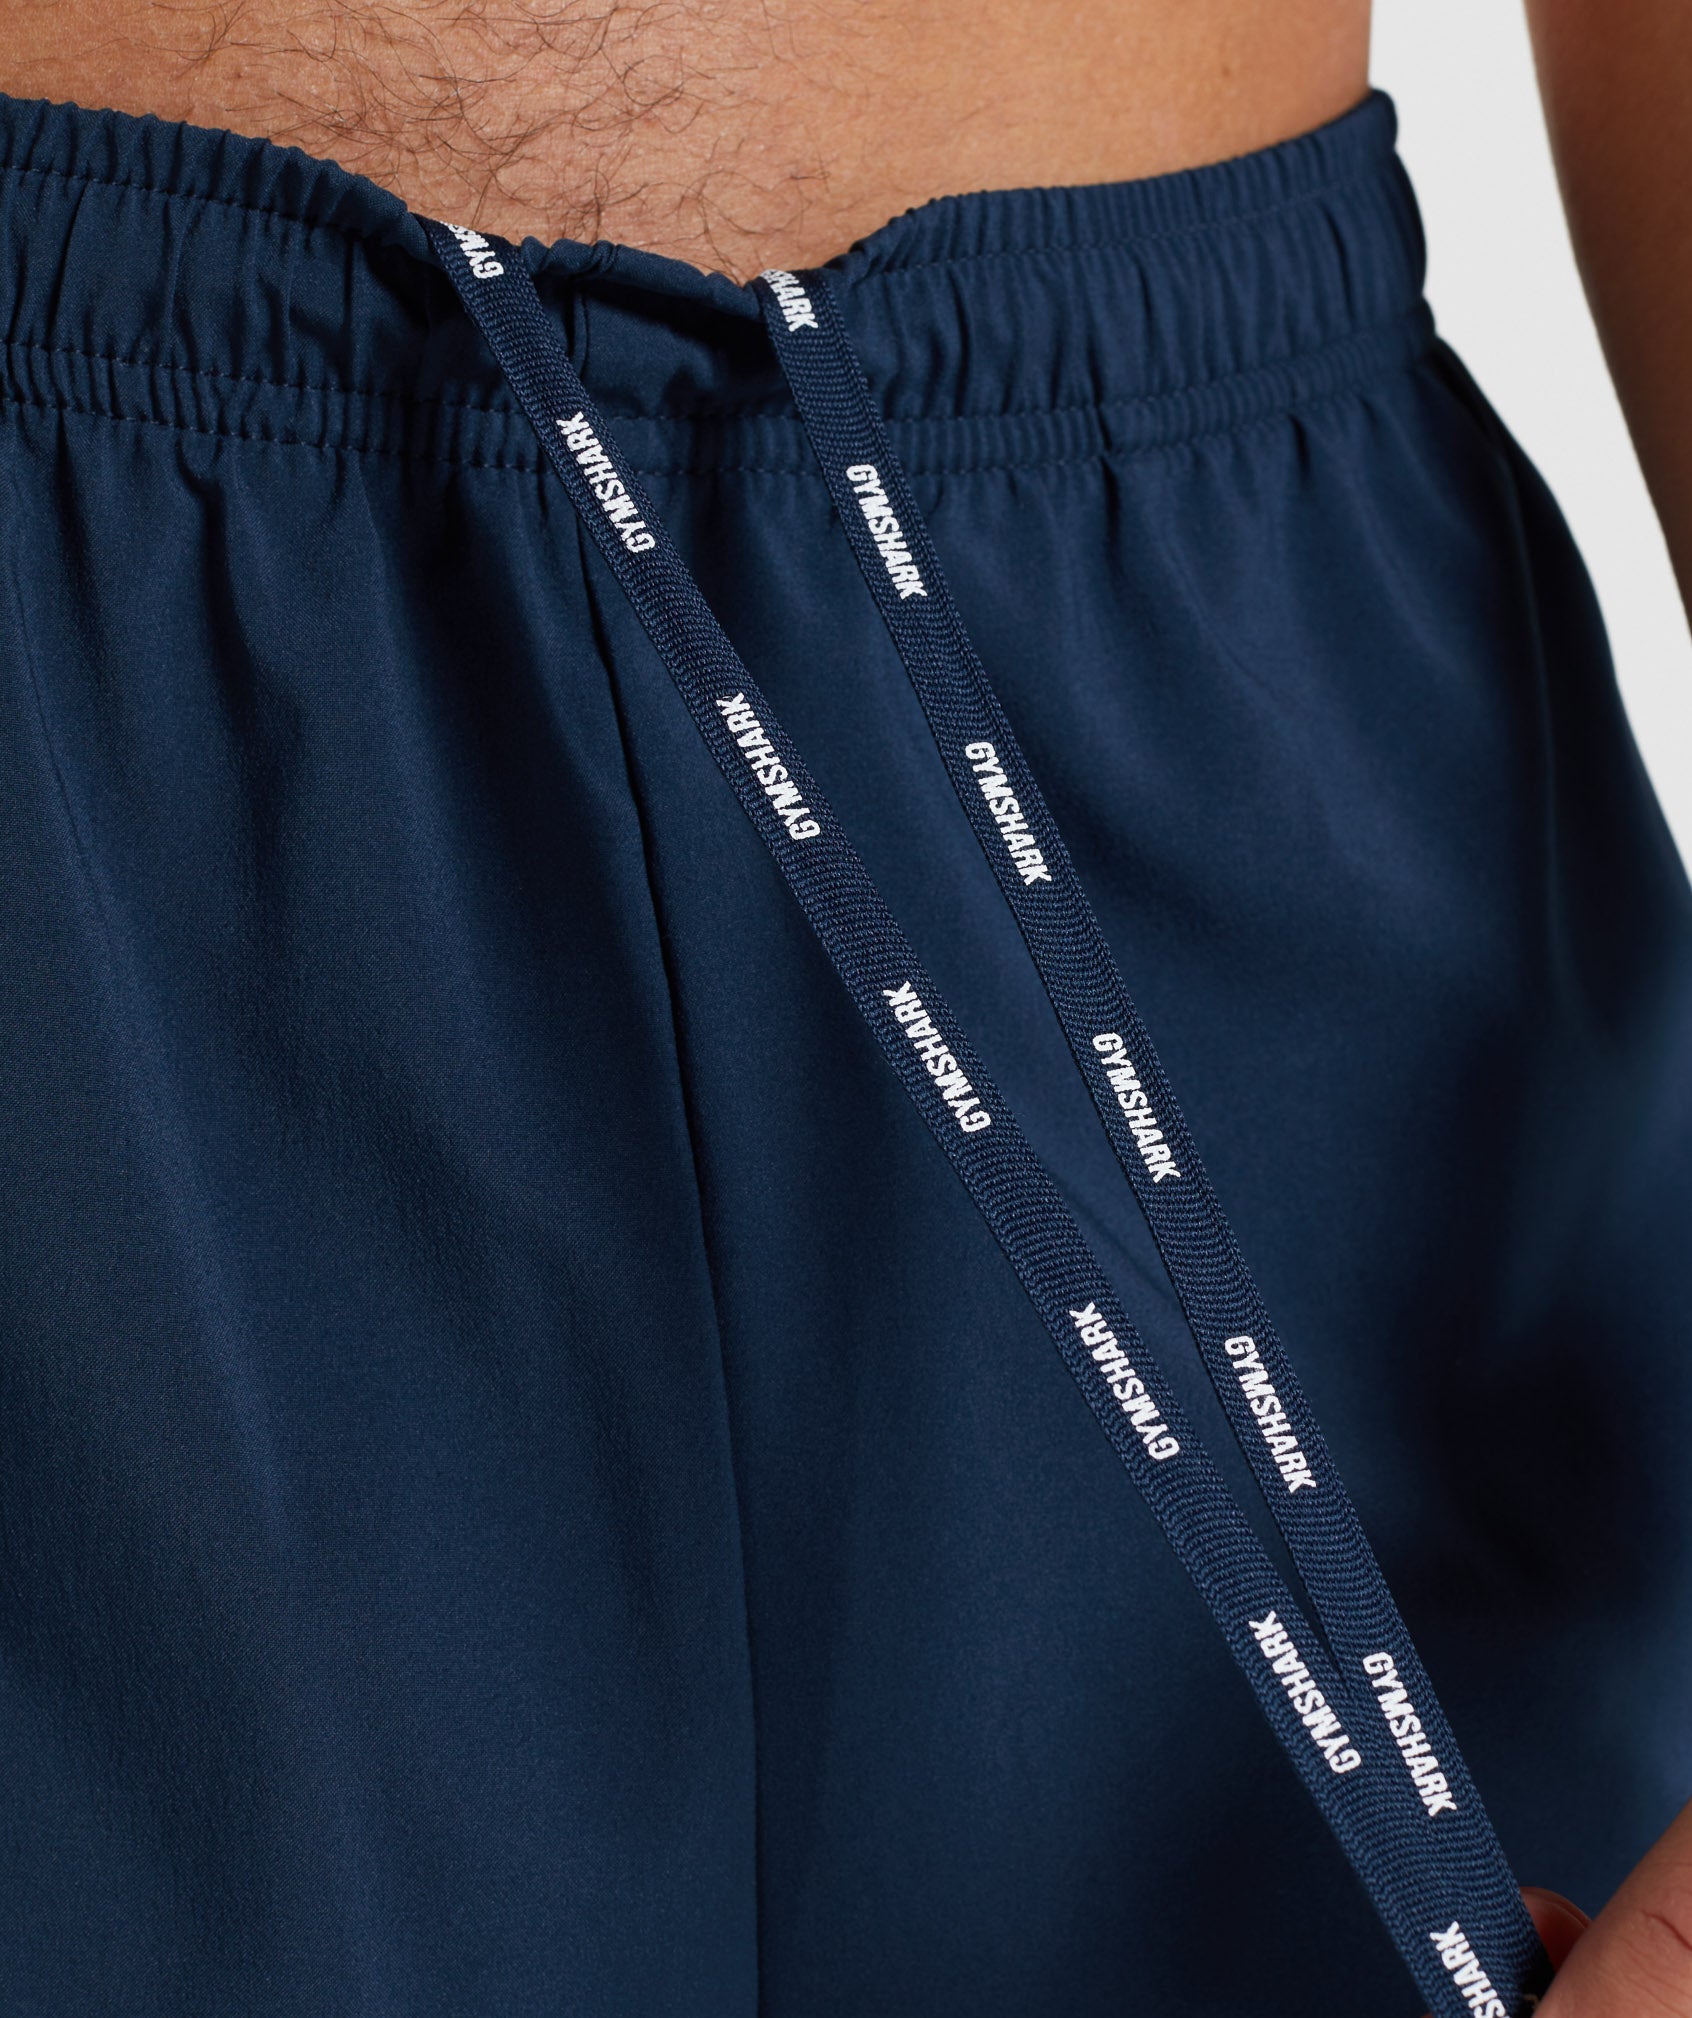 Arrival 5" Shorts in Navy - view 6